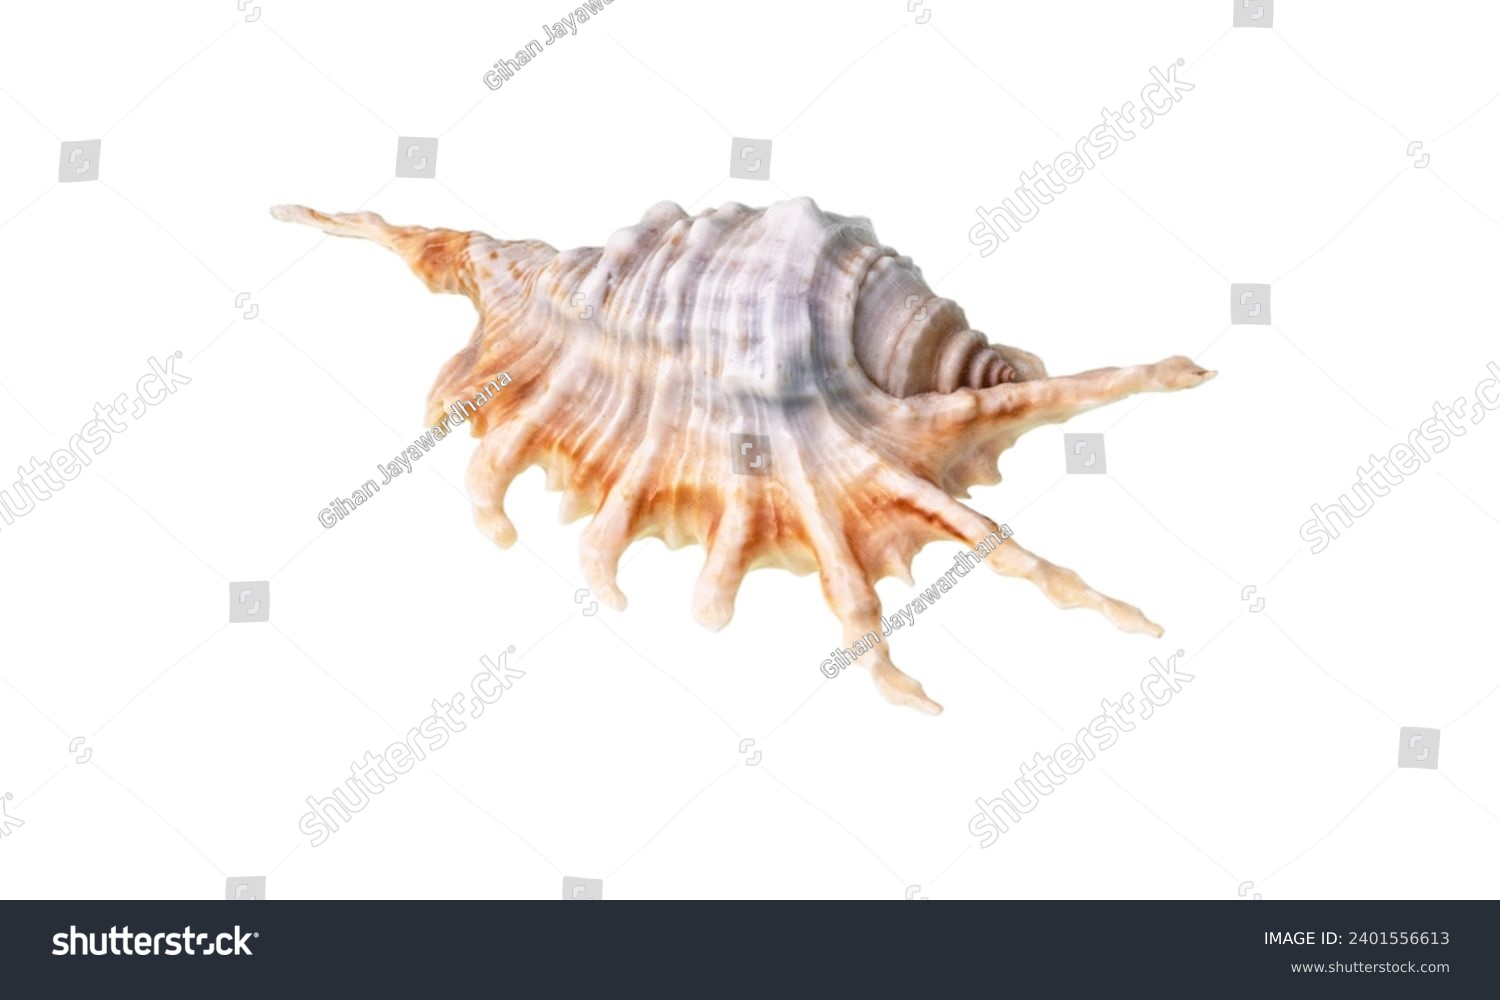 Nautilidae shell isolated on white background. sea shell close-up. This has clipping path. close-up At Holly Beach in southwest Louisiana's Gulf Coast, a Murex shell was discovered. #2401556613